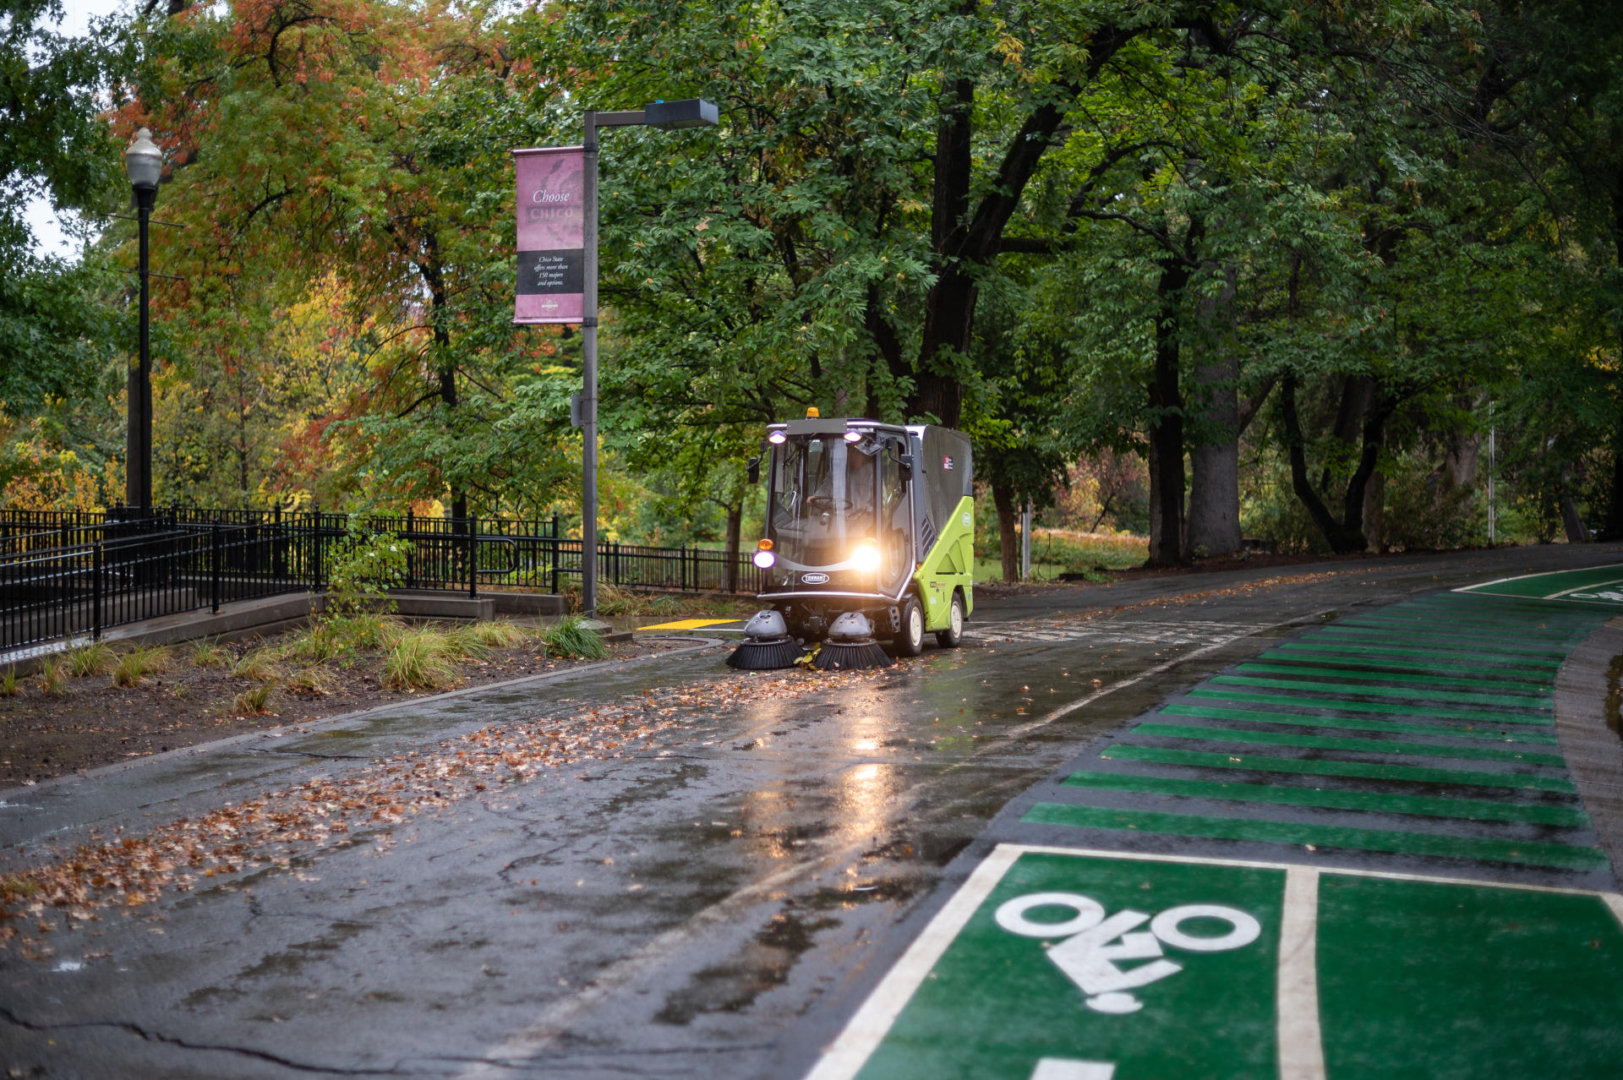 An all-electric street sweeper picks up leaves on a rainy road.